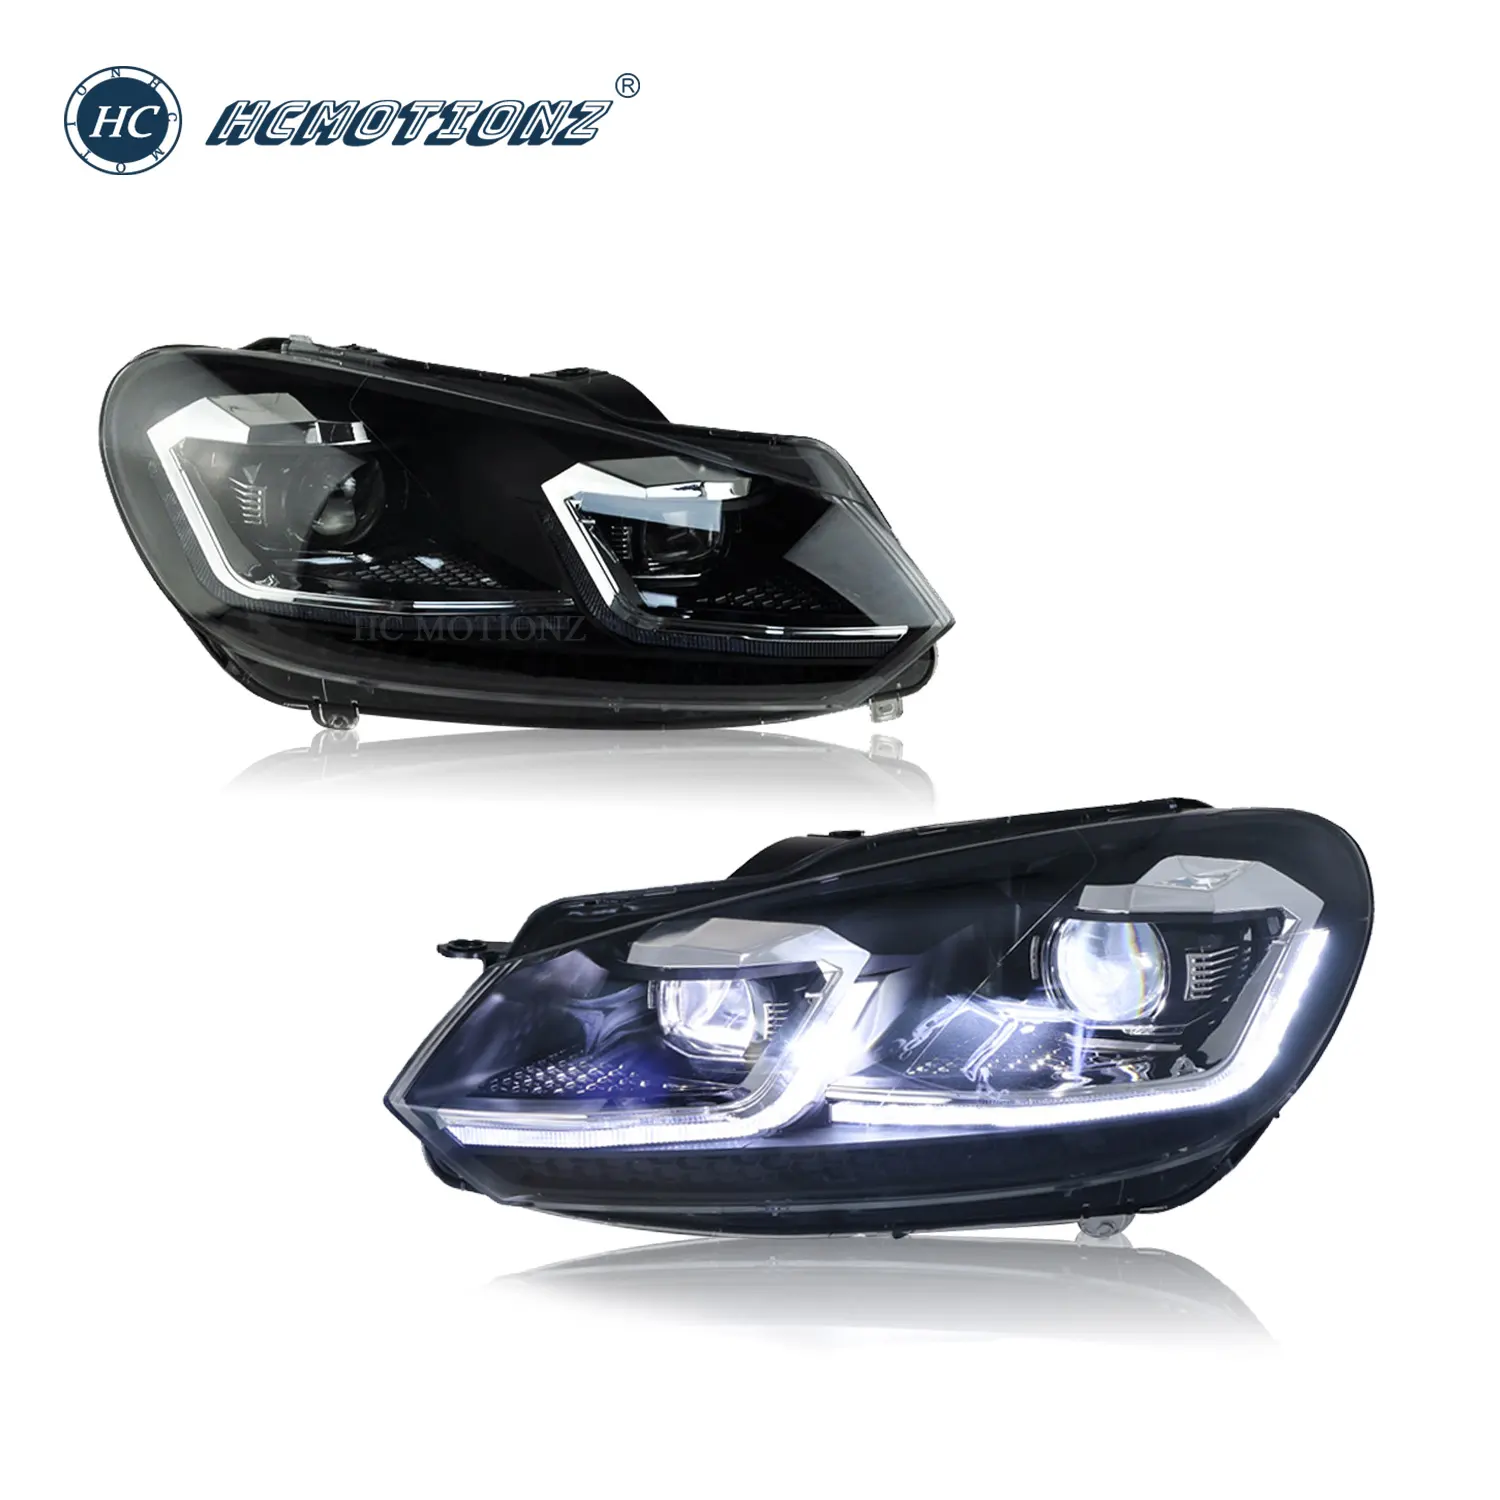 HCmotion Wholesales 7.5 style LED Xenon 2008 2009 2010 2011 2012 2013 2014 Front Head Lights Golf 6 Head Lamps For VW Golf MK6